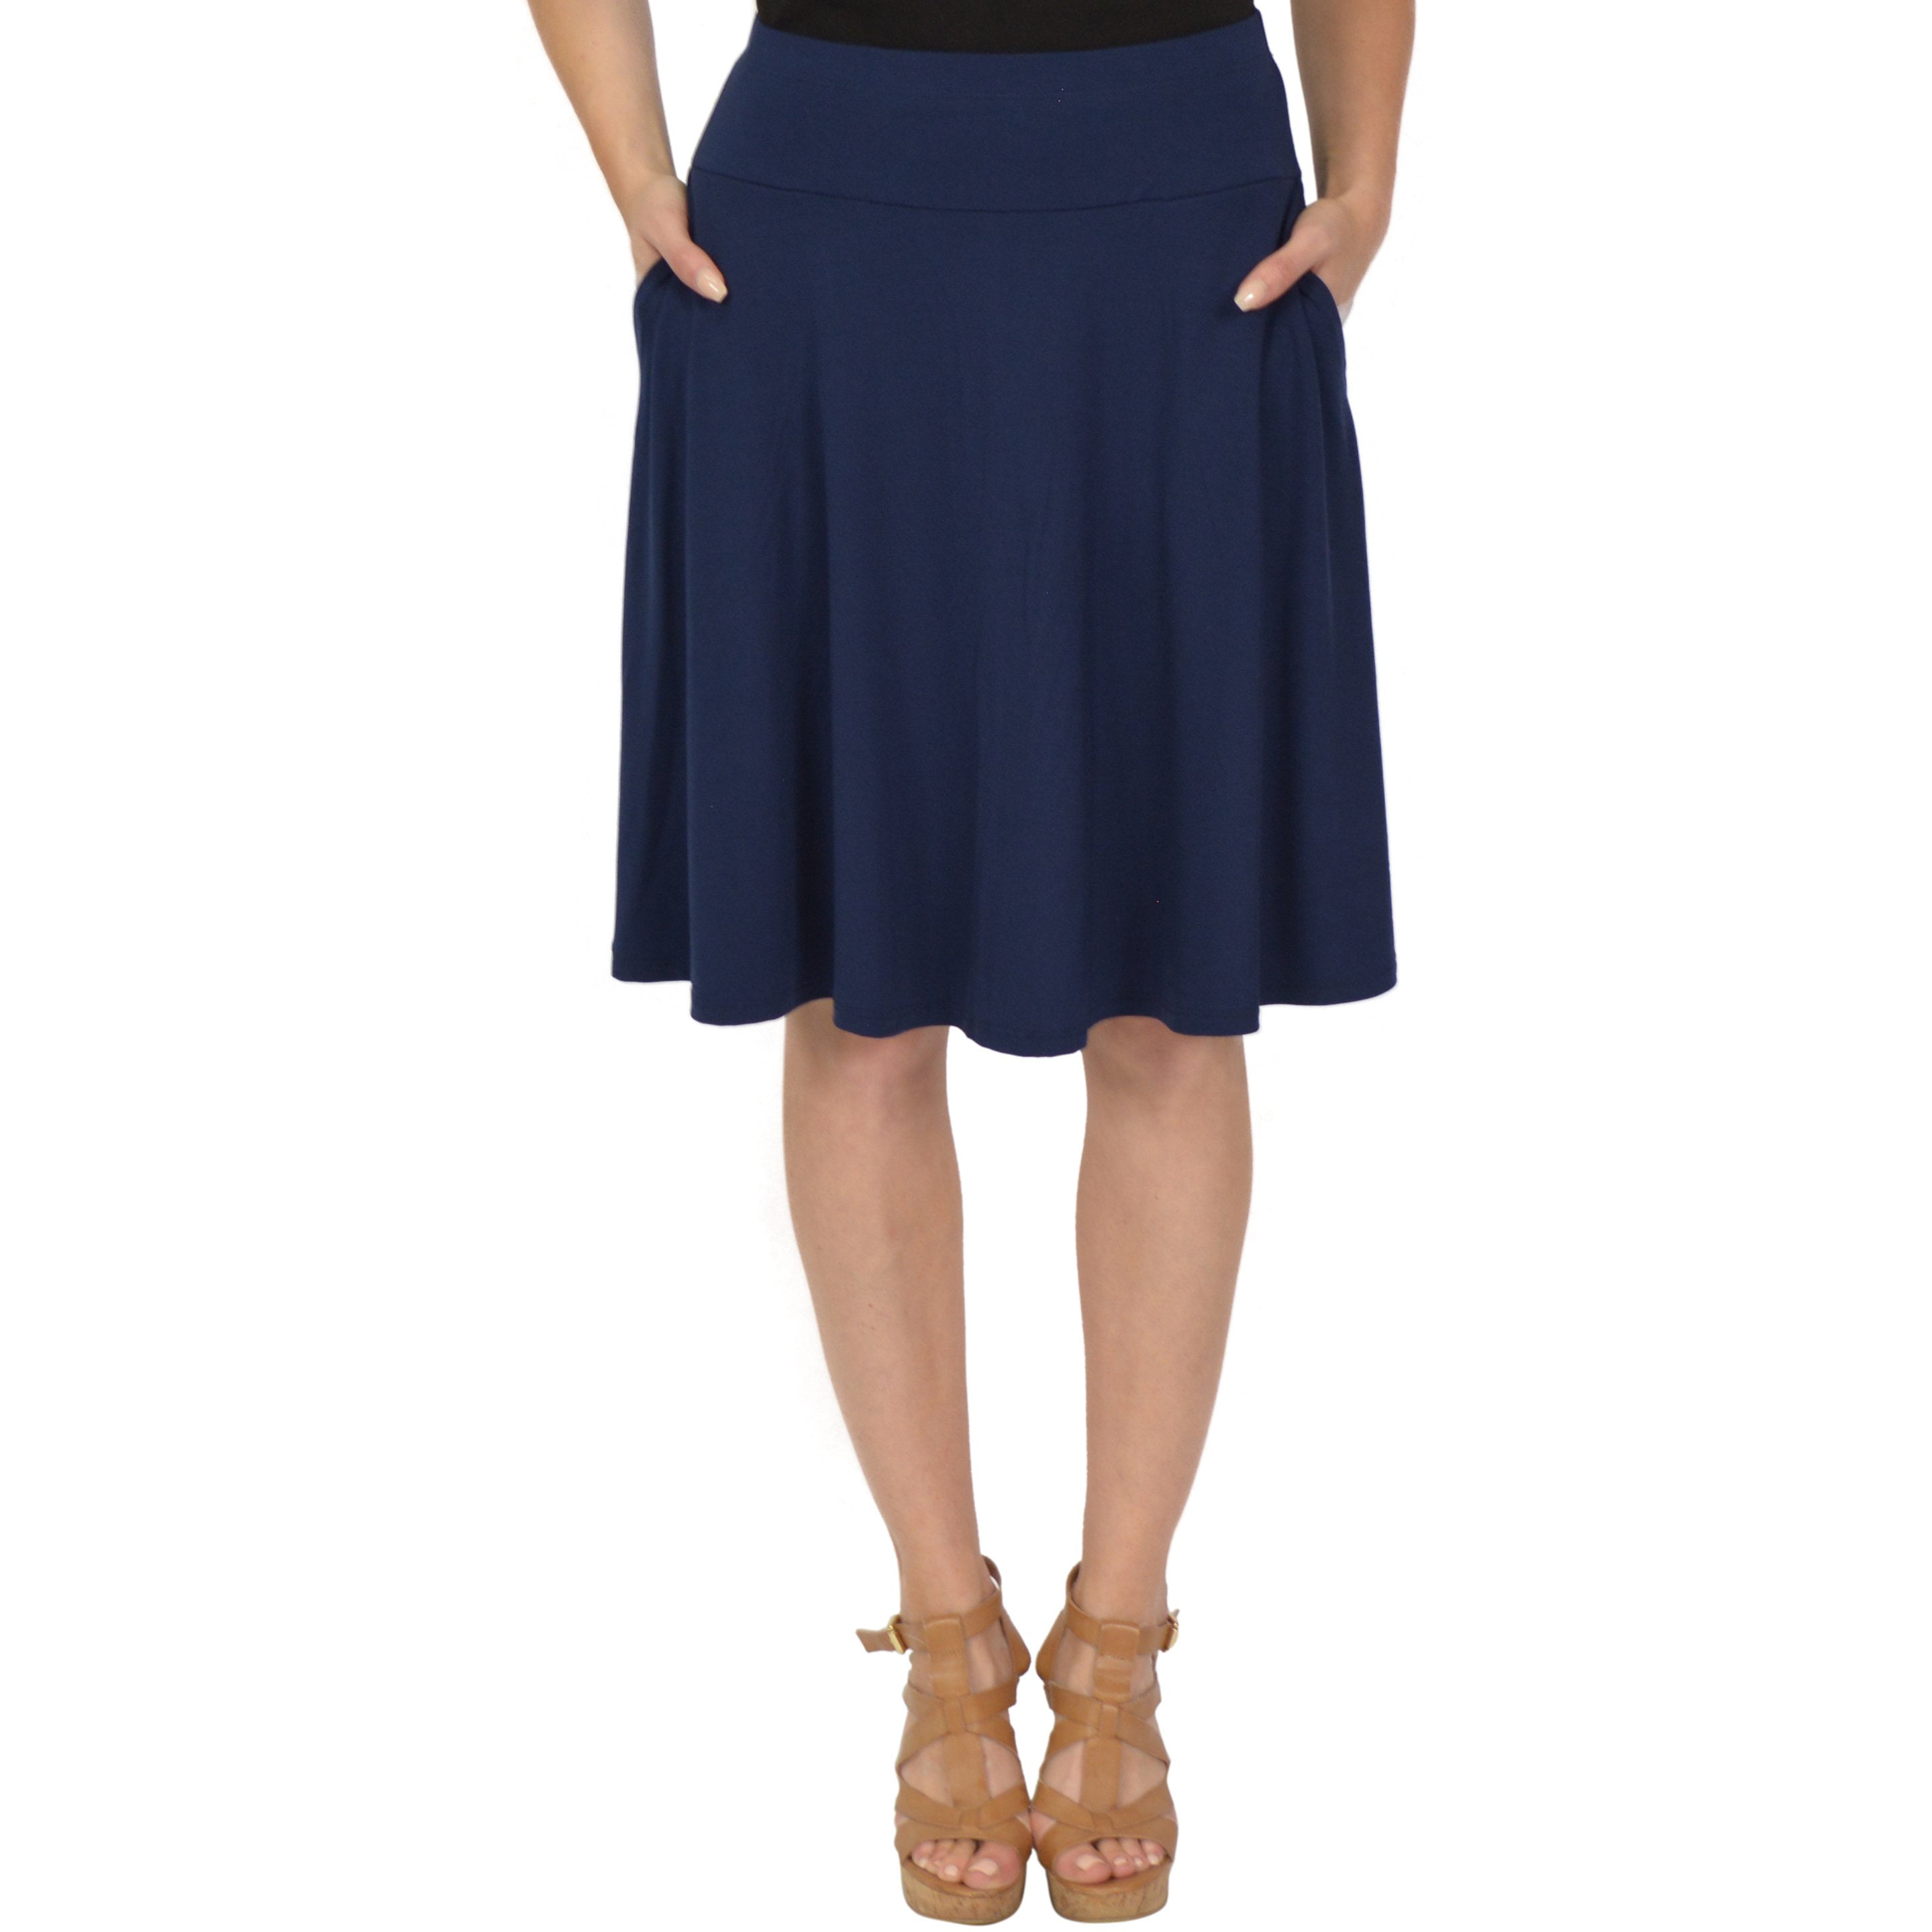 Stretch Is Comfort - Stretch Is Comfort Women's and Girl's A-Line Skirt ...